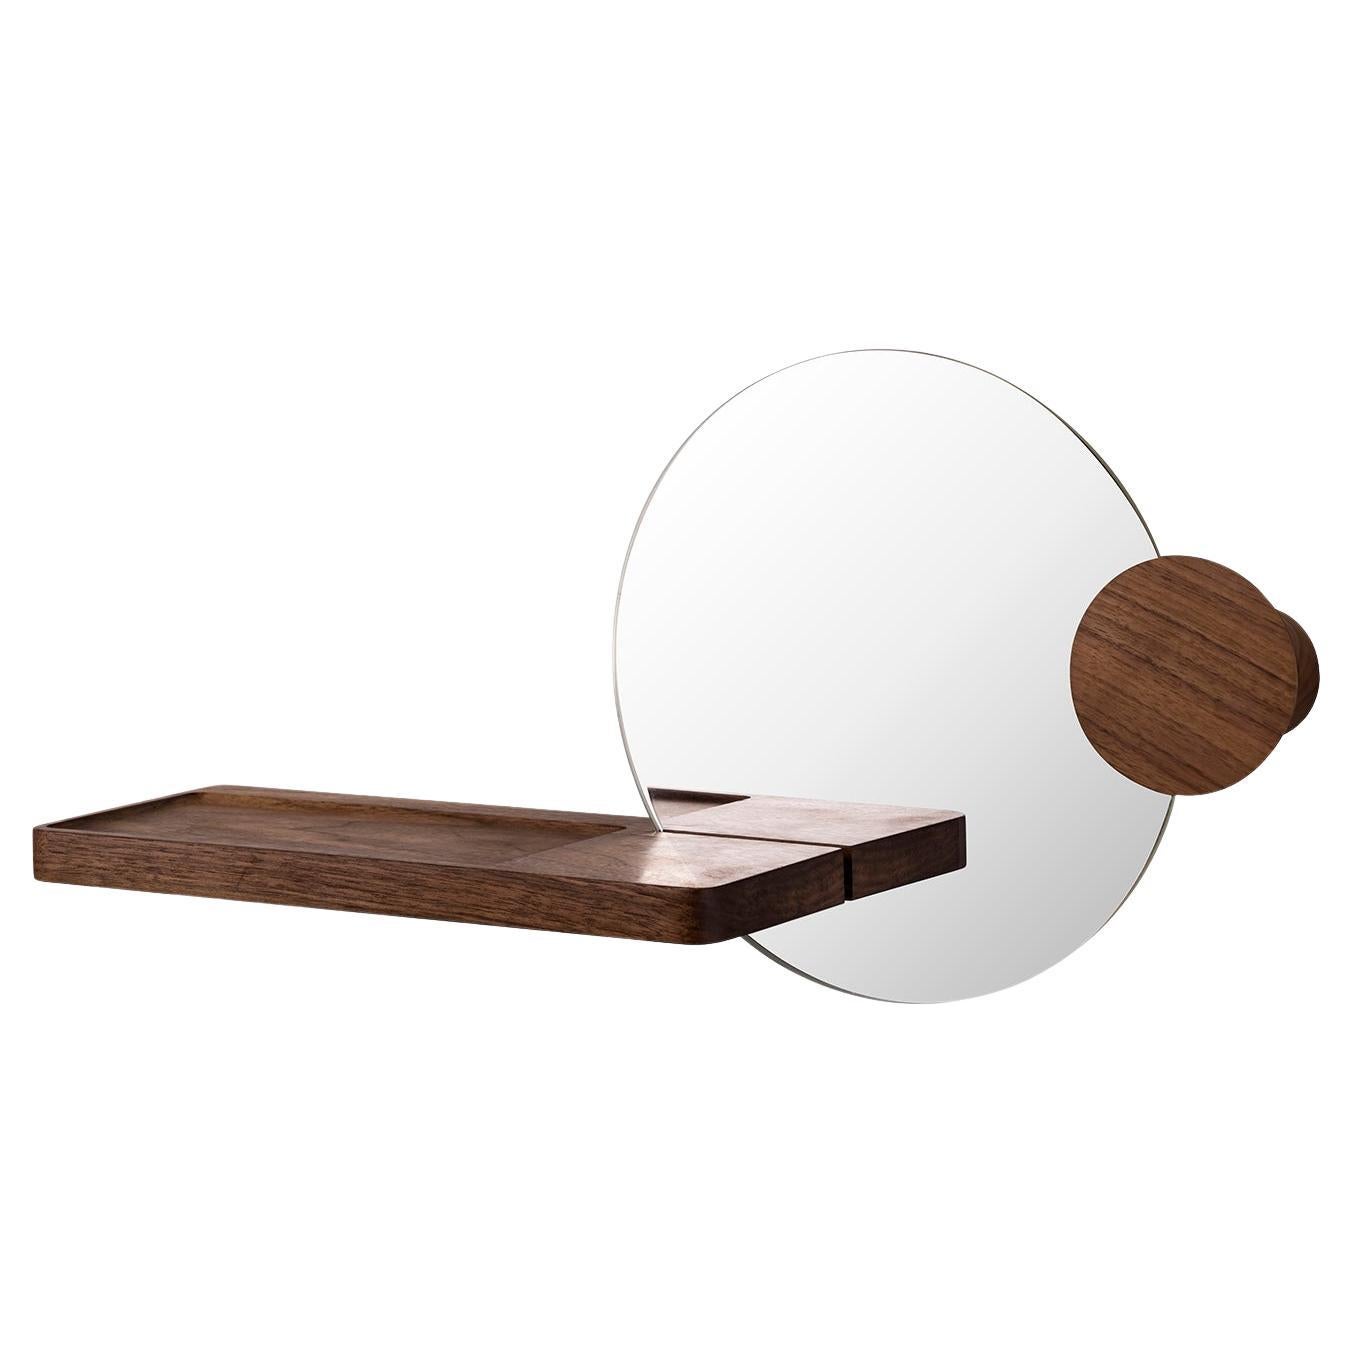 Glimpse Wall Mounted Shelf with Mirror & Coat Rack For Sale